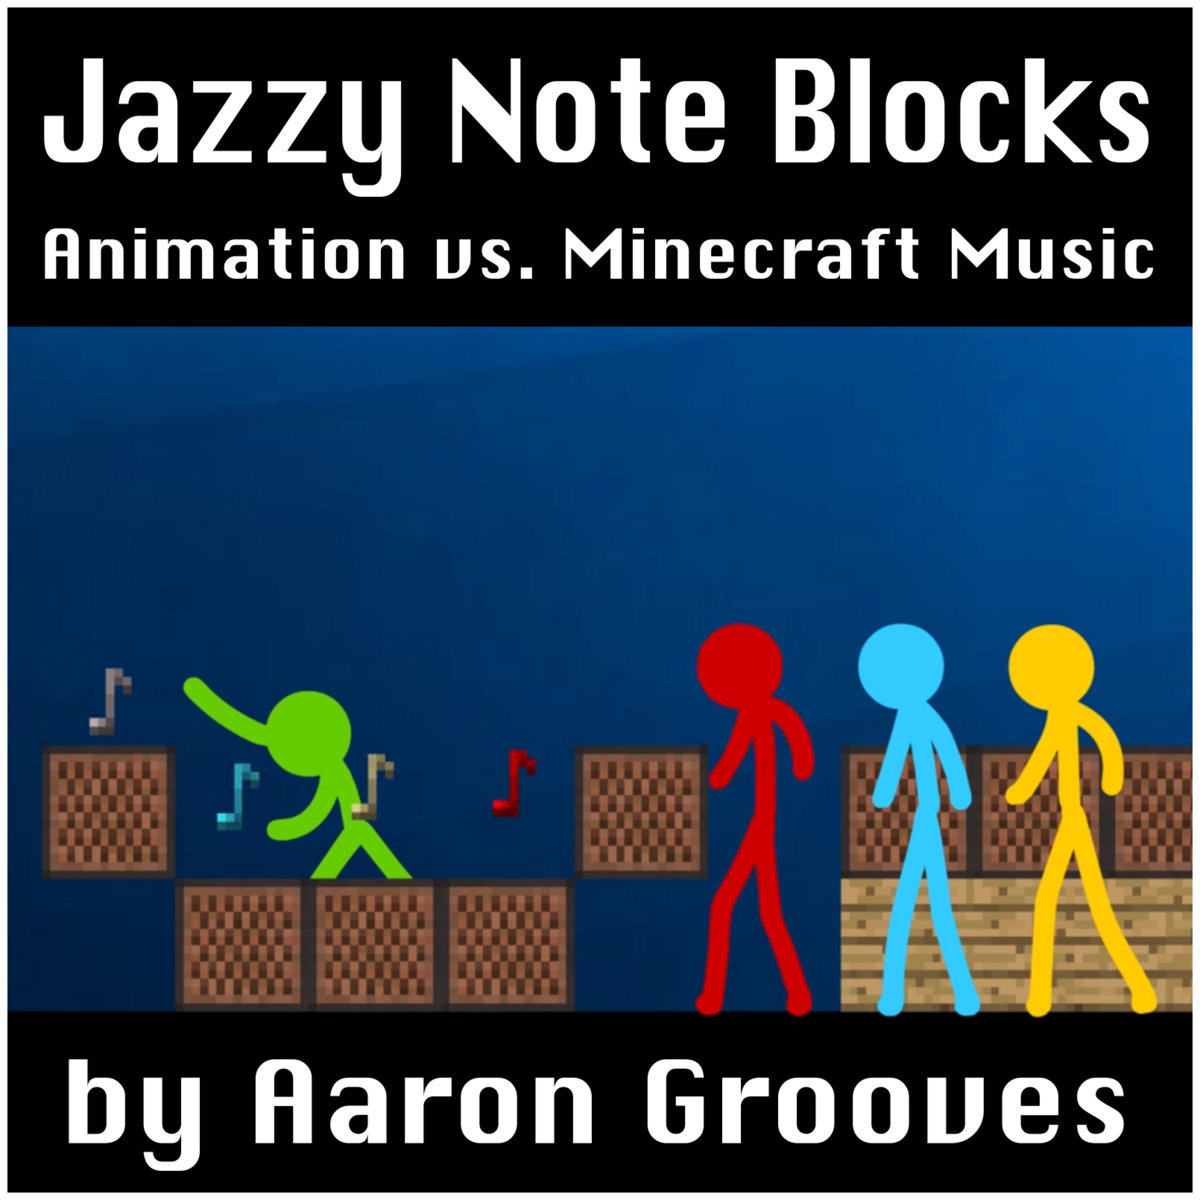 Pigstep AvM Remix --Music from animation Vs Minecraft Ep 25 